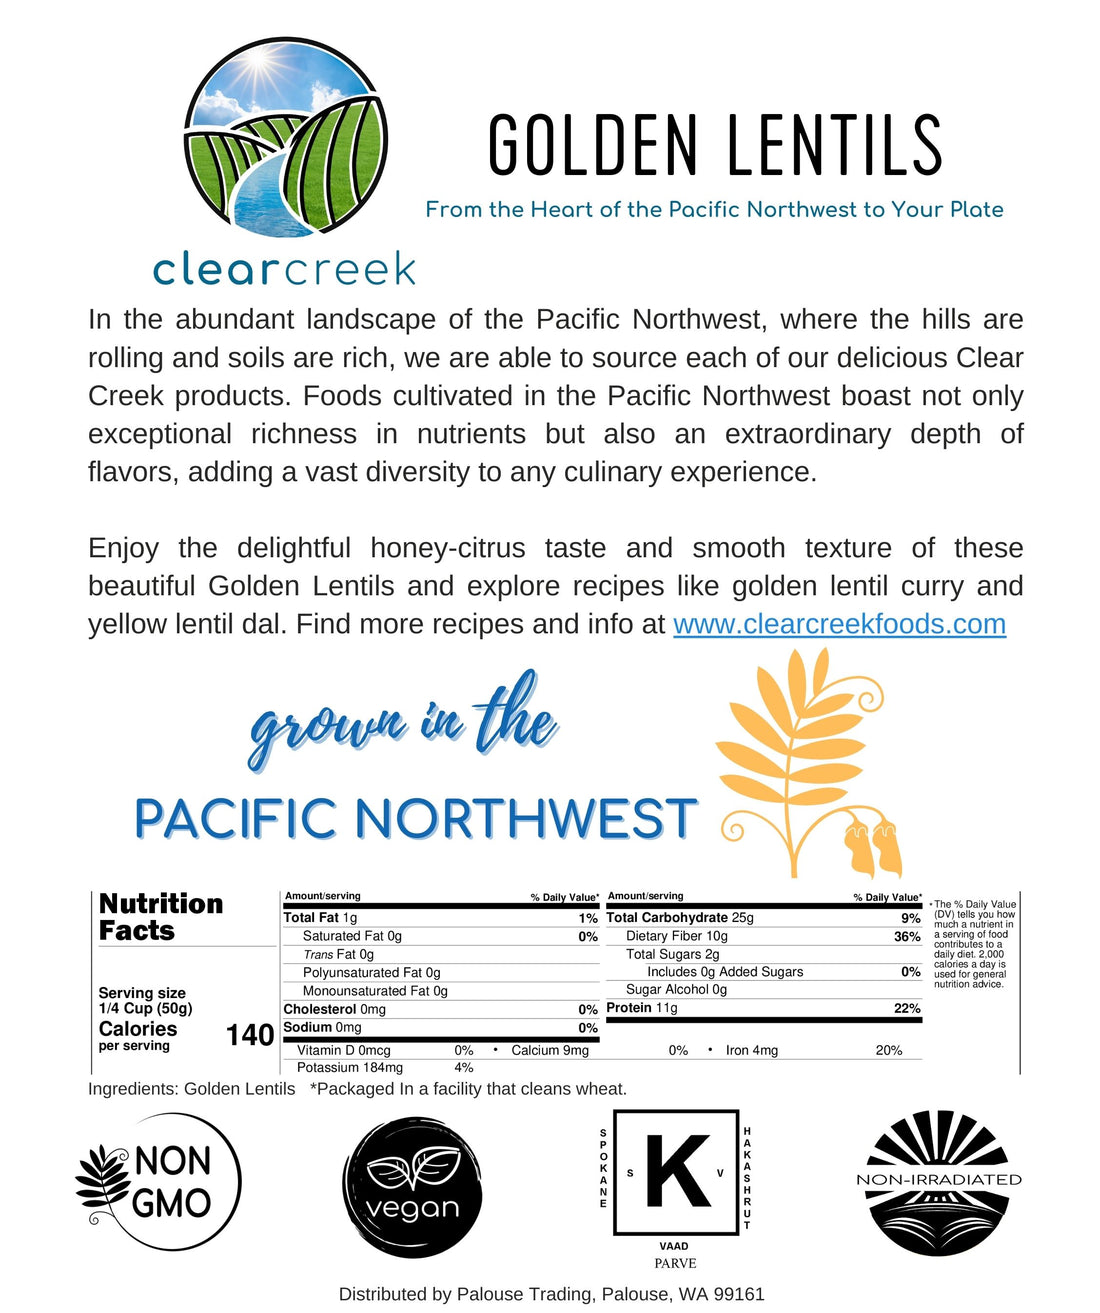 Nutrition Facts for Idaho Grown Golden Lentils